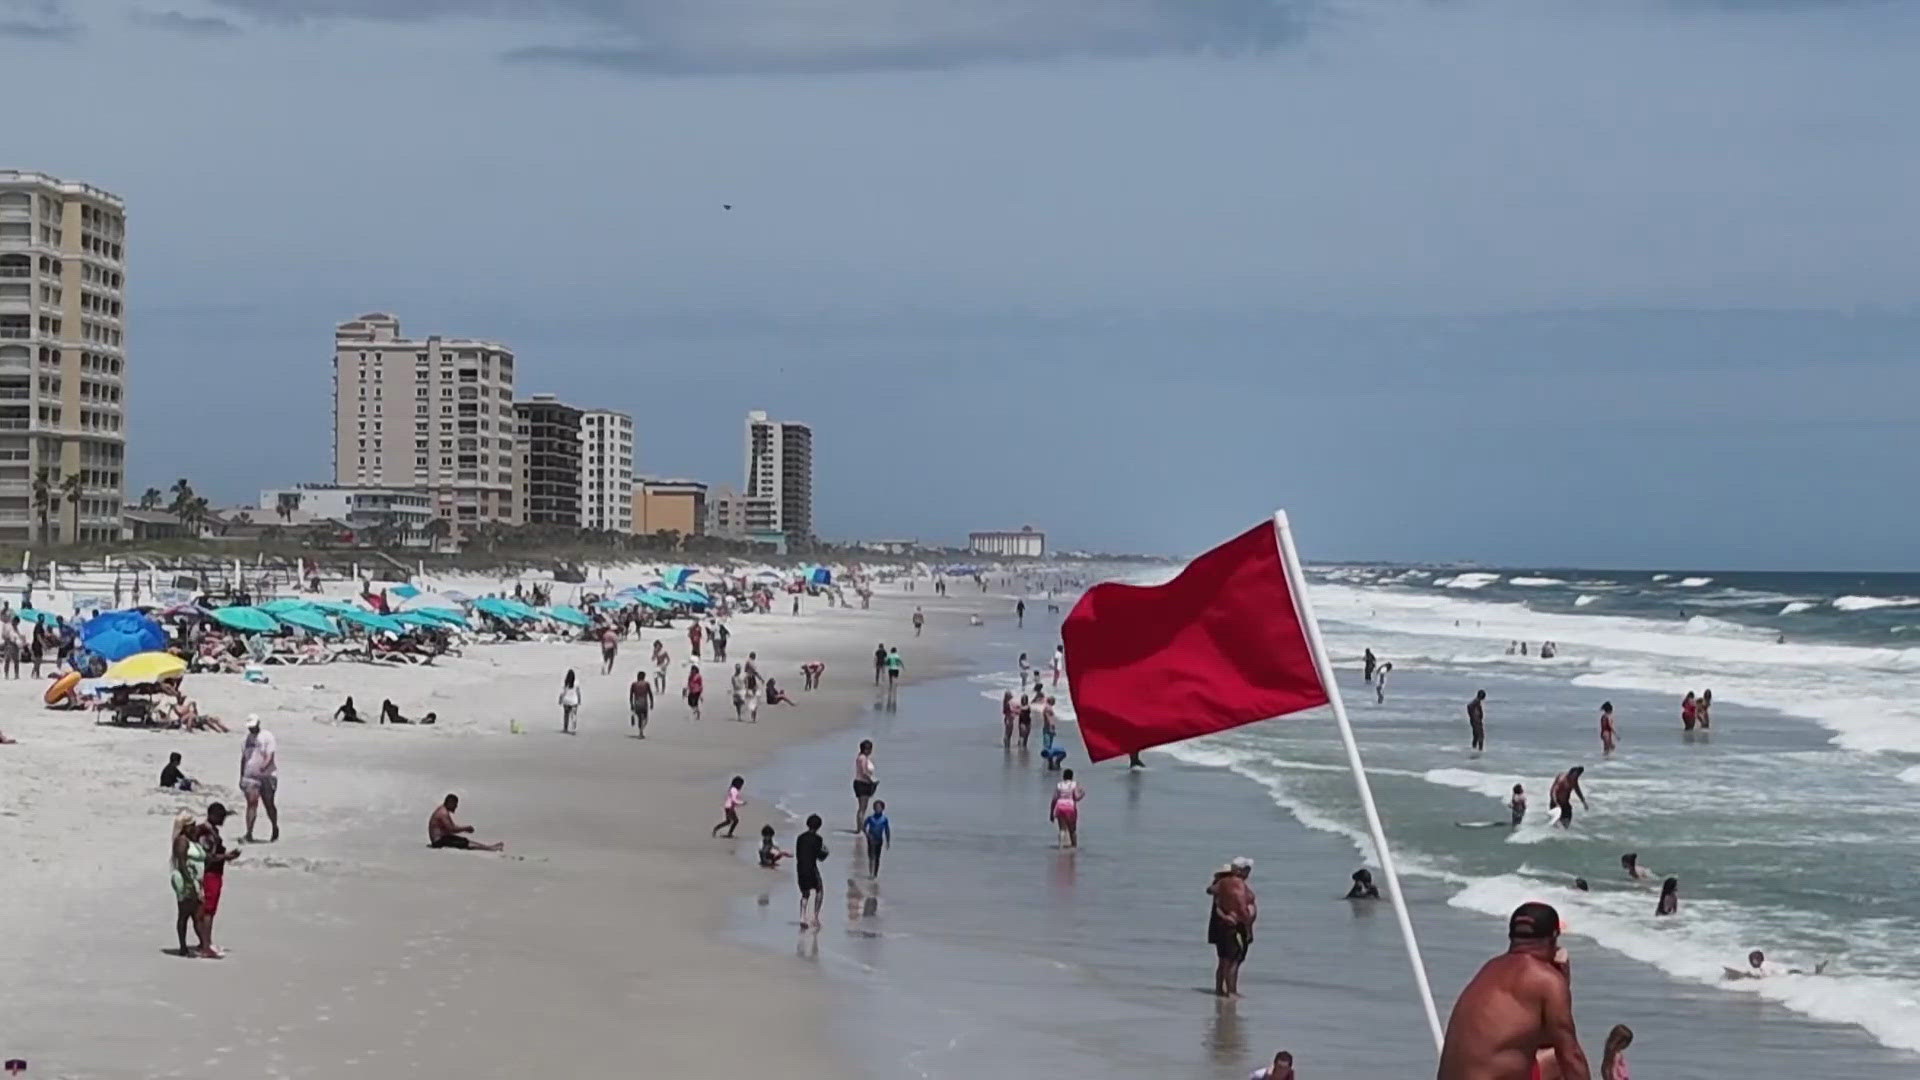 From rip currents to dredging, some things you need to remember if heading to the beach.